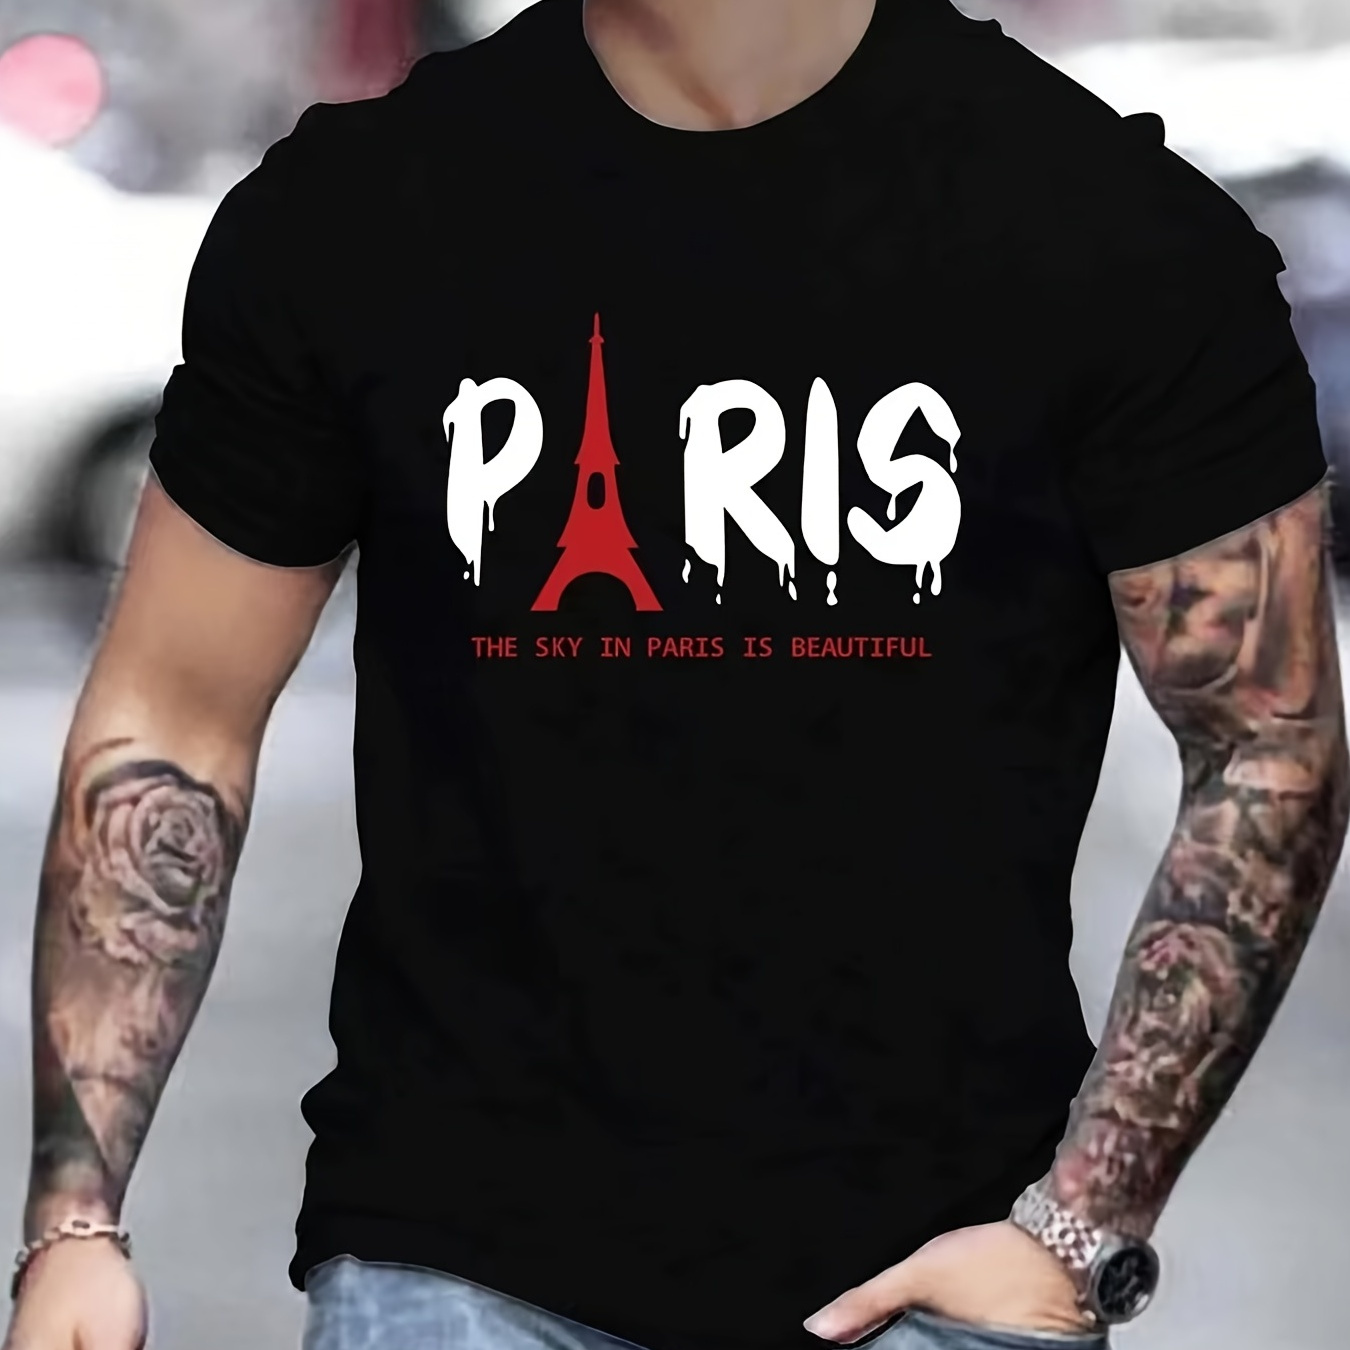 

'paris' Eiffel Tower Print T Shirt, Tees For Men, Casual Short Sleeve Tshirt For Summer Spring Fall, Tops As Gifts